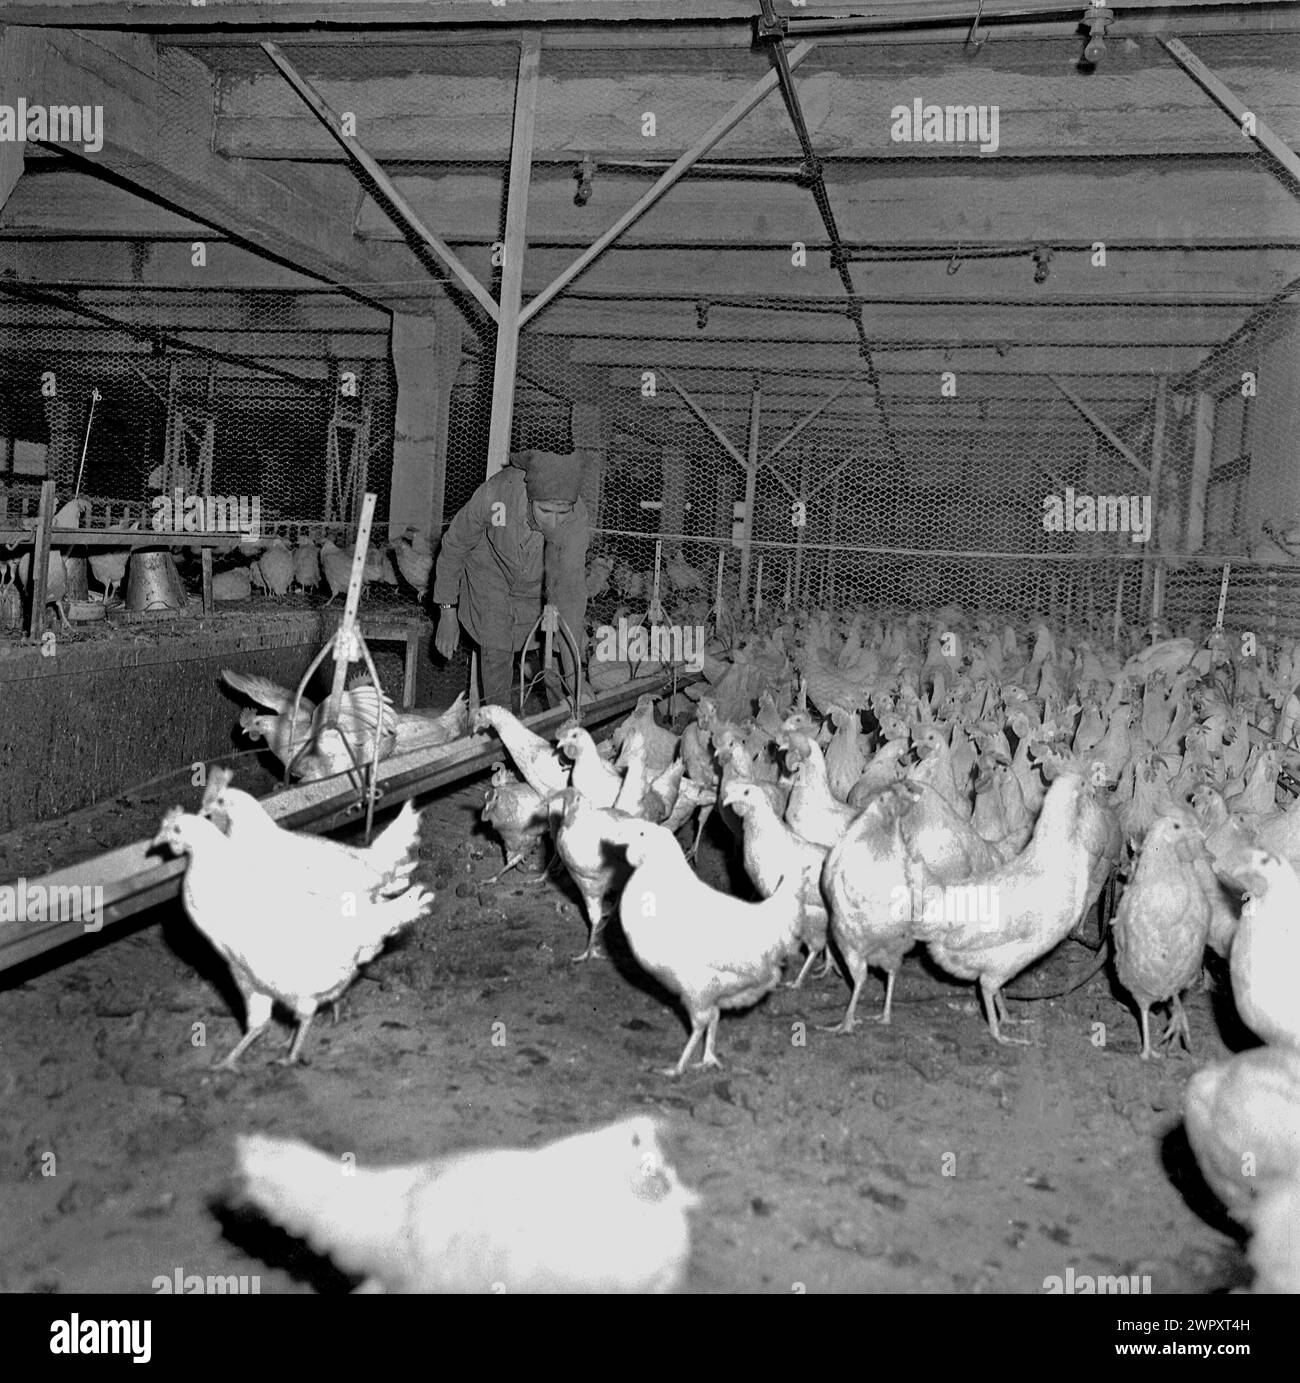 State agricultural cooperative in communist Romania, in the 1970s. Raising chickens at a state-run factory farm. Stock Photo